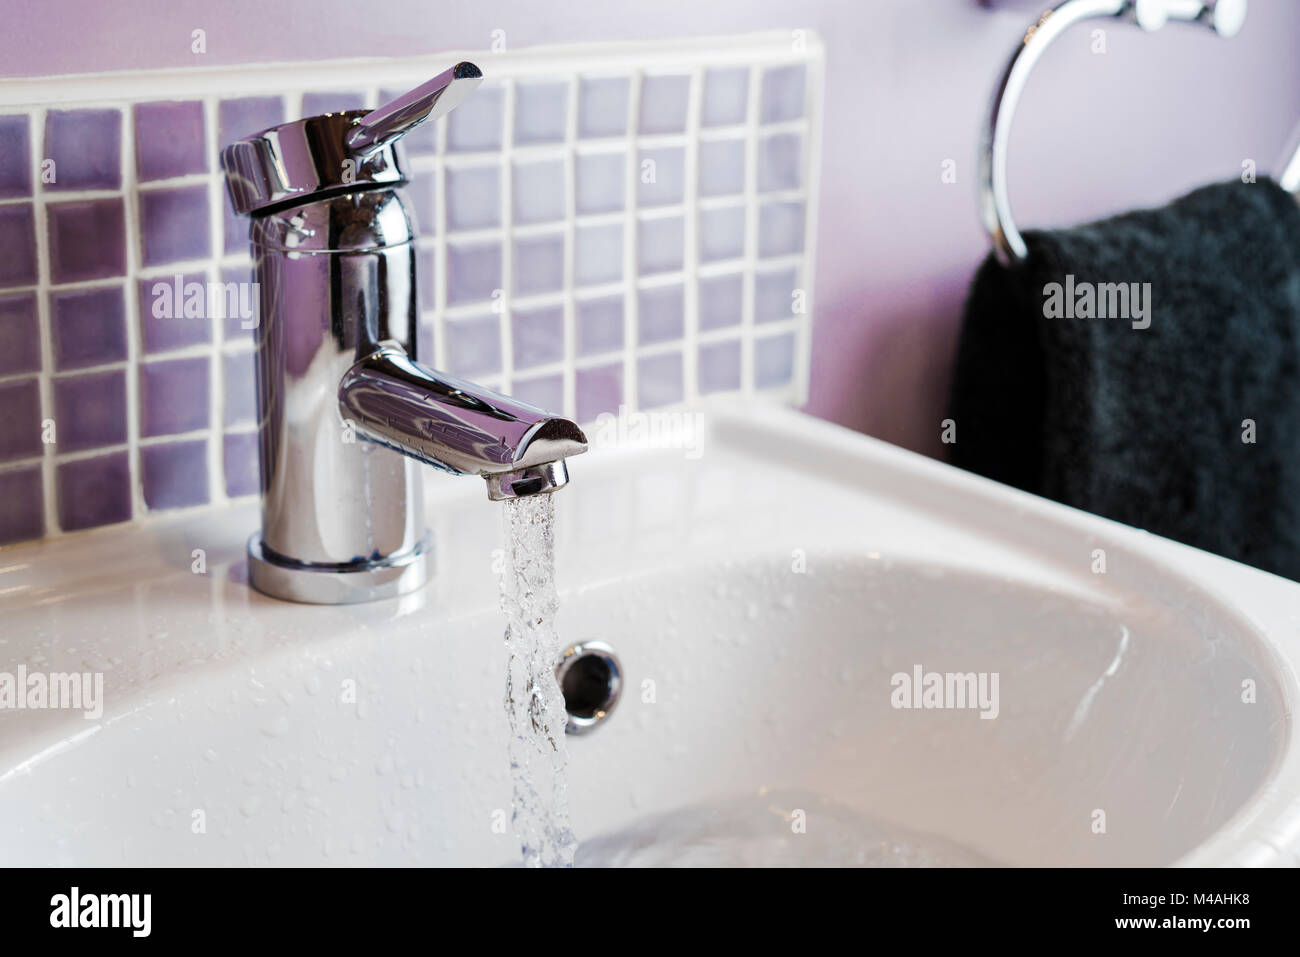 Water running from a bathroom tap or faucet, into a a hand basin. Stock Photo